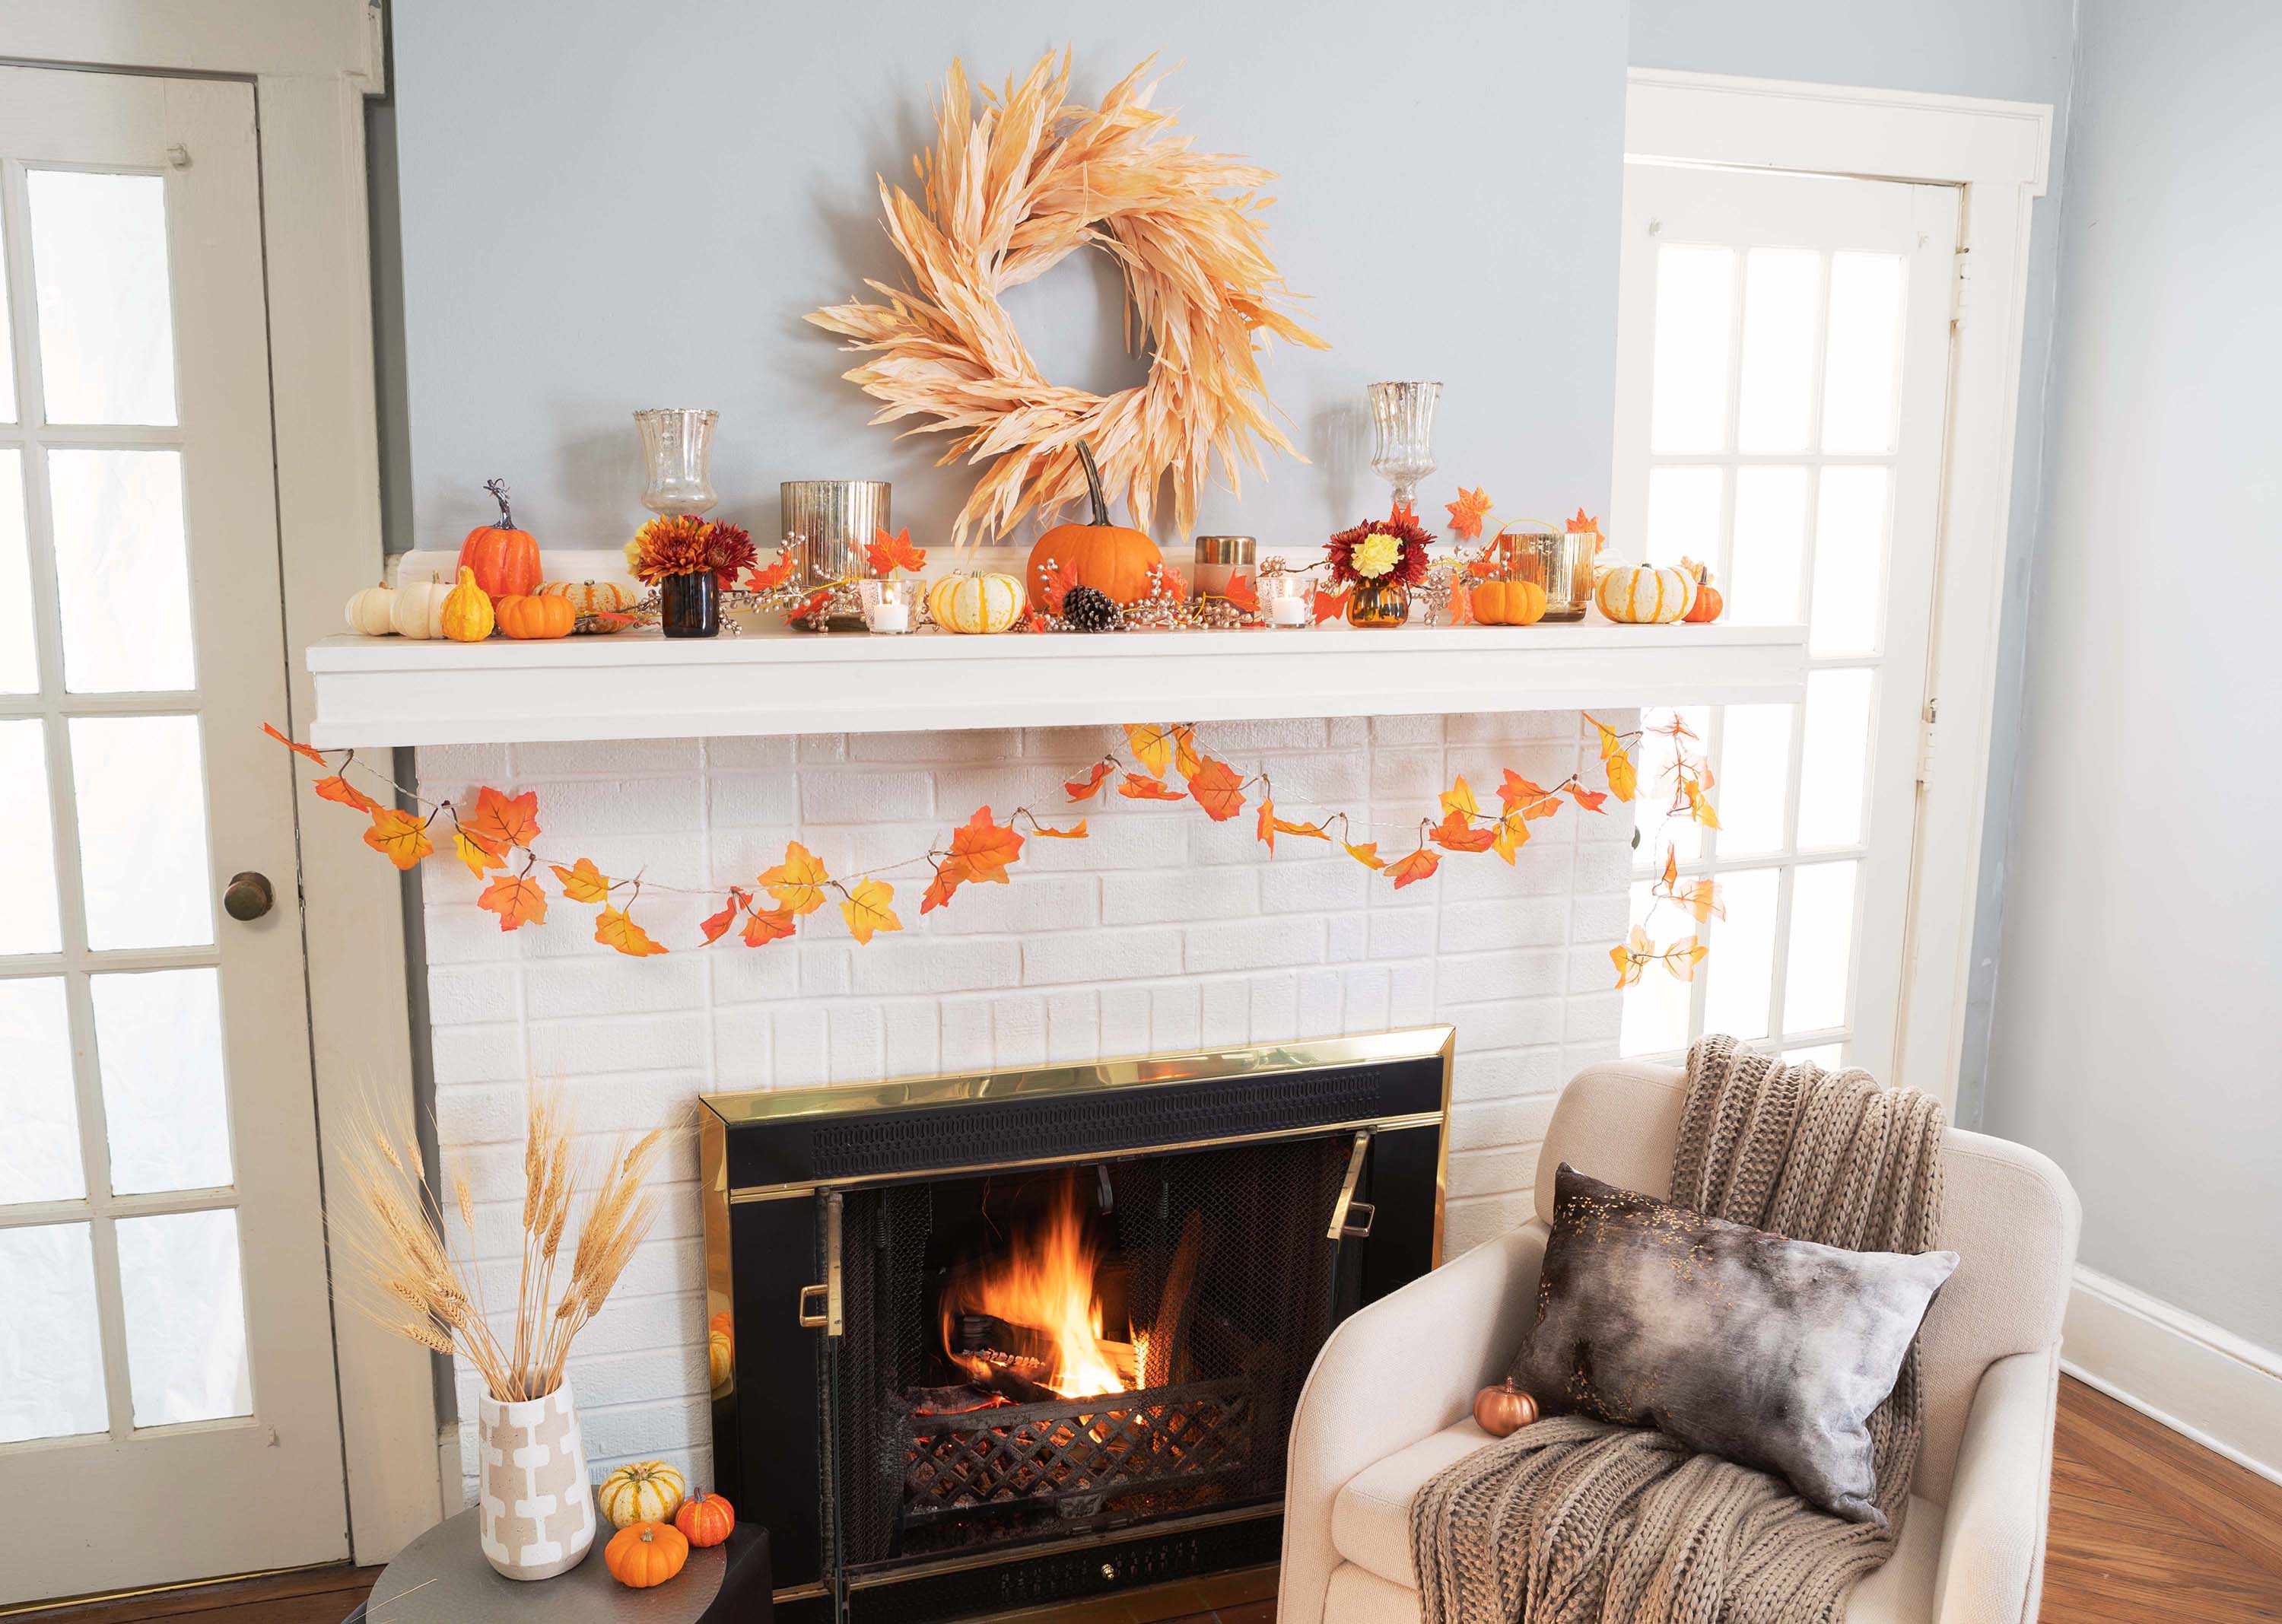 A fireplace mantel with fall decorations